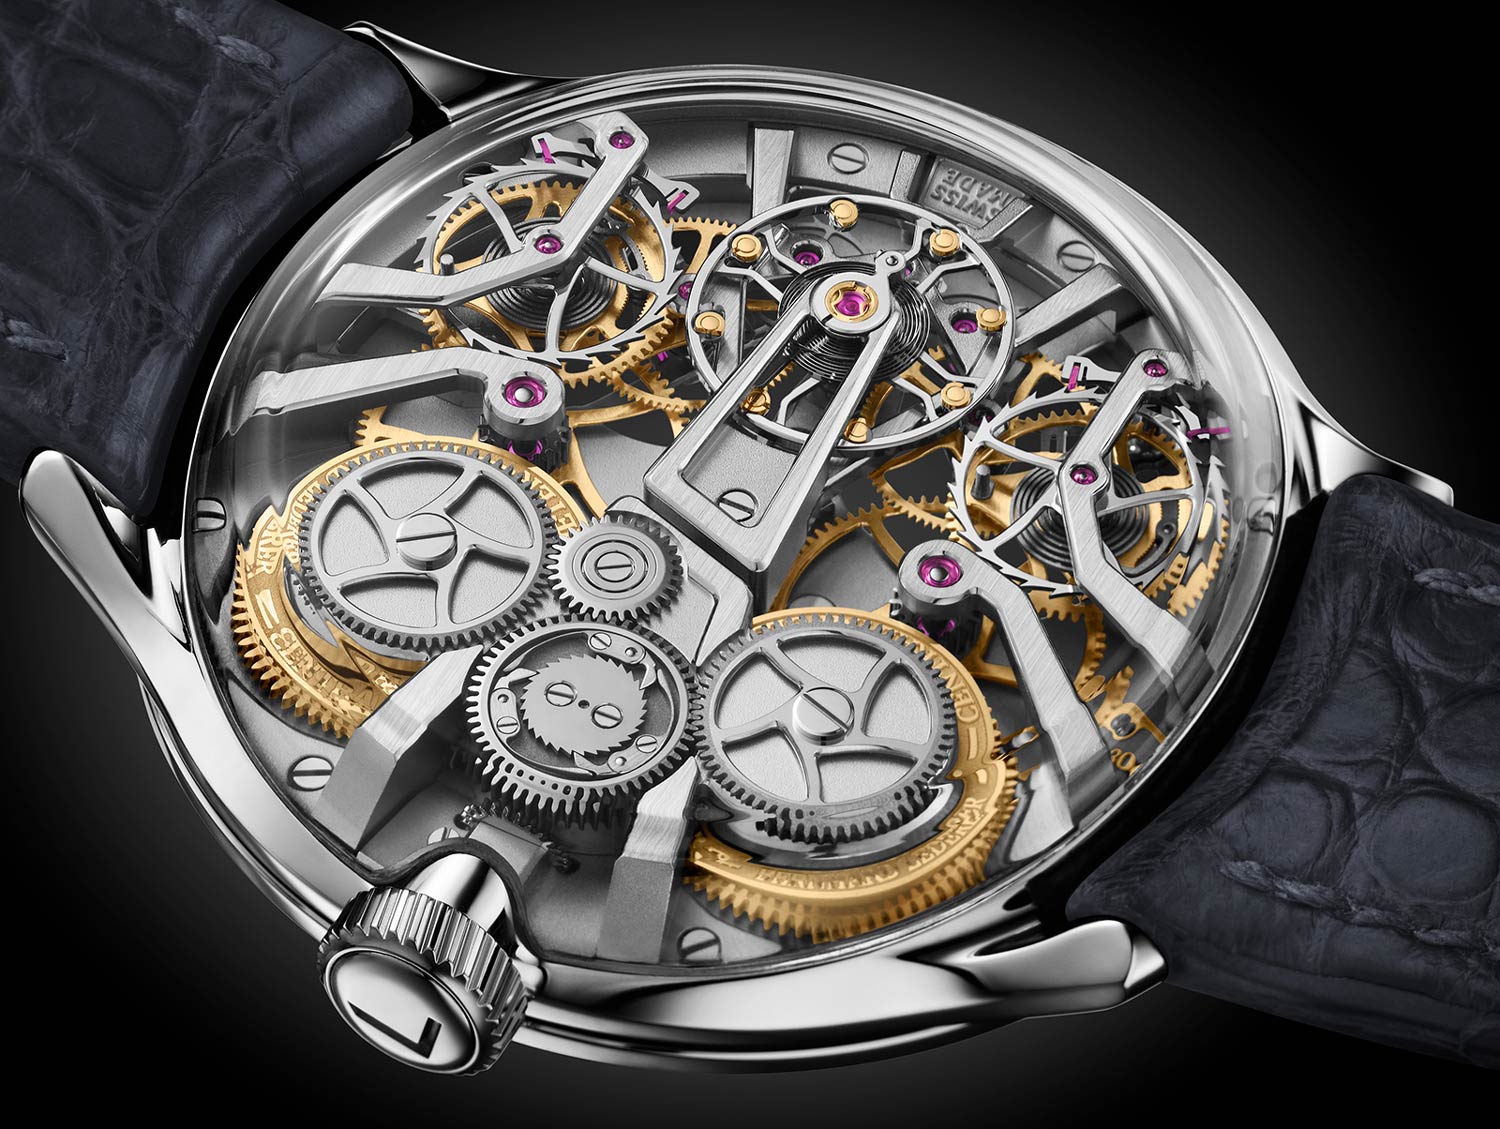 Visible through a domed sapphire case back, all components of the gear trains are secured to the base plate with slim bridges, offering an immersive view into the movement